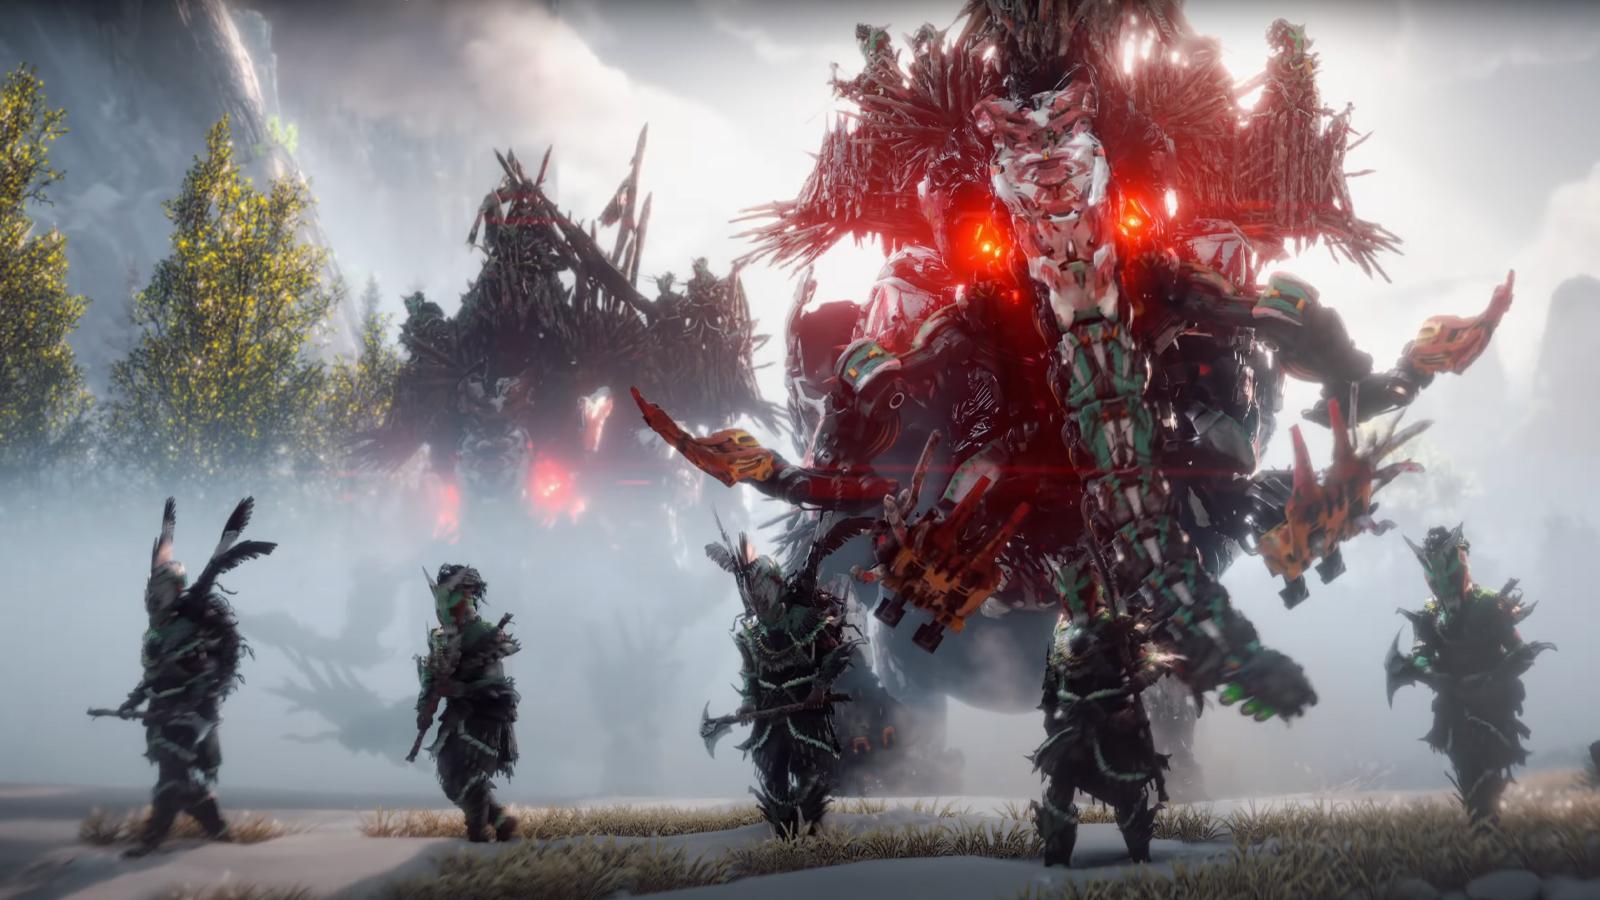 Four people stand armored in front of a gigantic mechanical creature, surrounded by fog